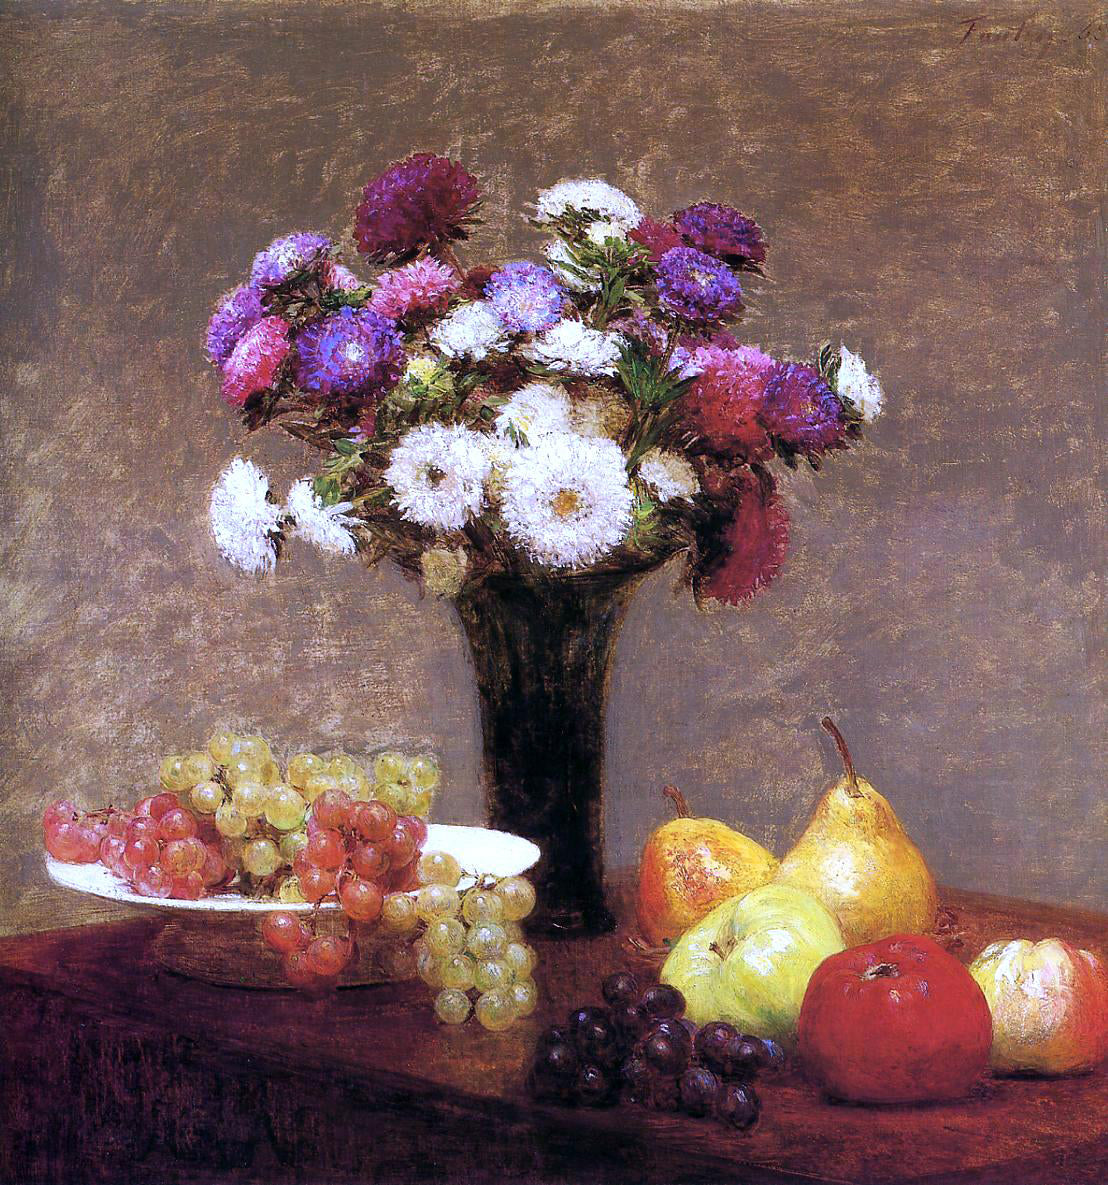  Henri Fantin-Latour Asters and Fruit on a Table - Hand Painted Oil Painting